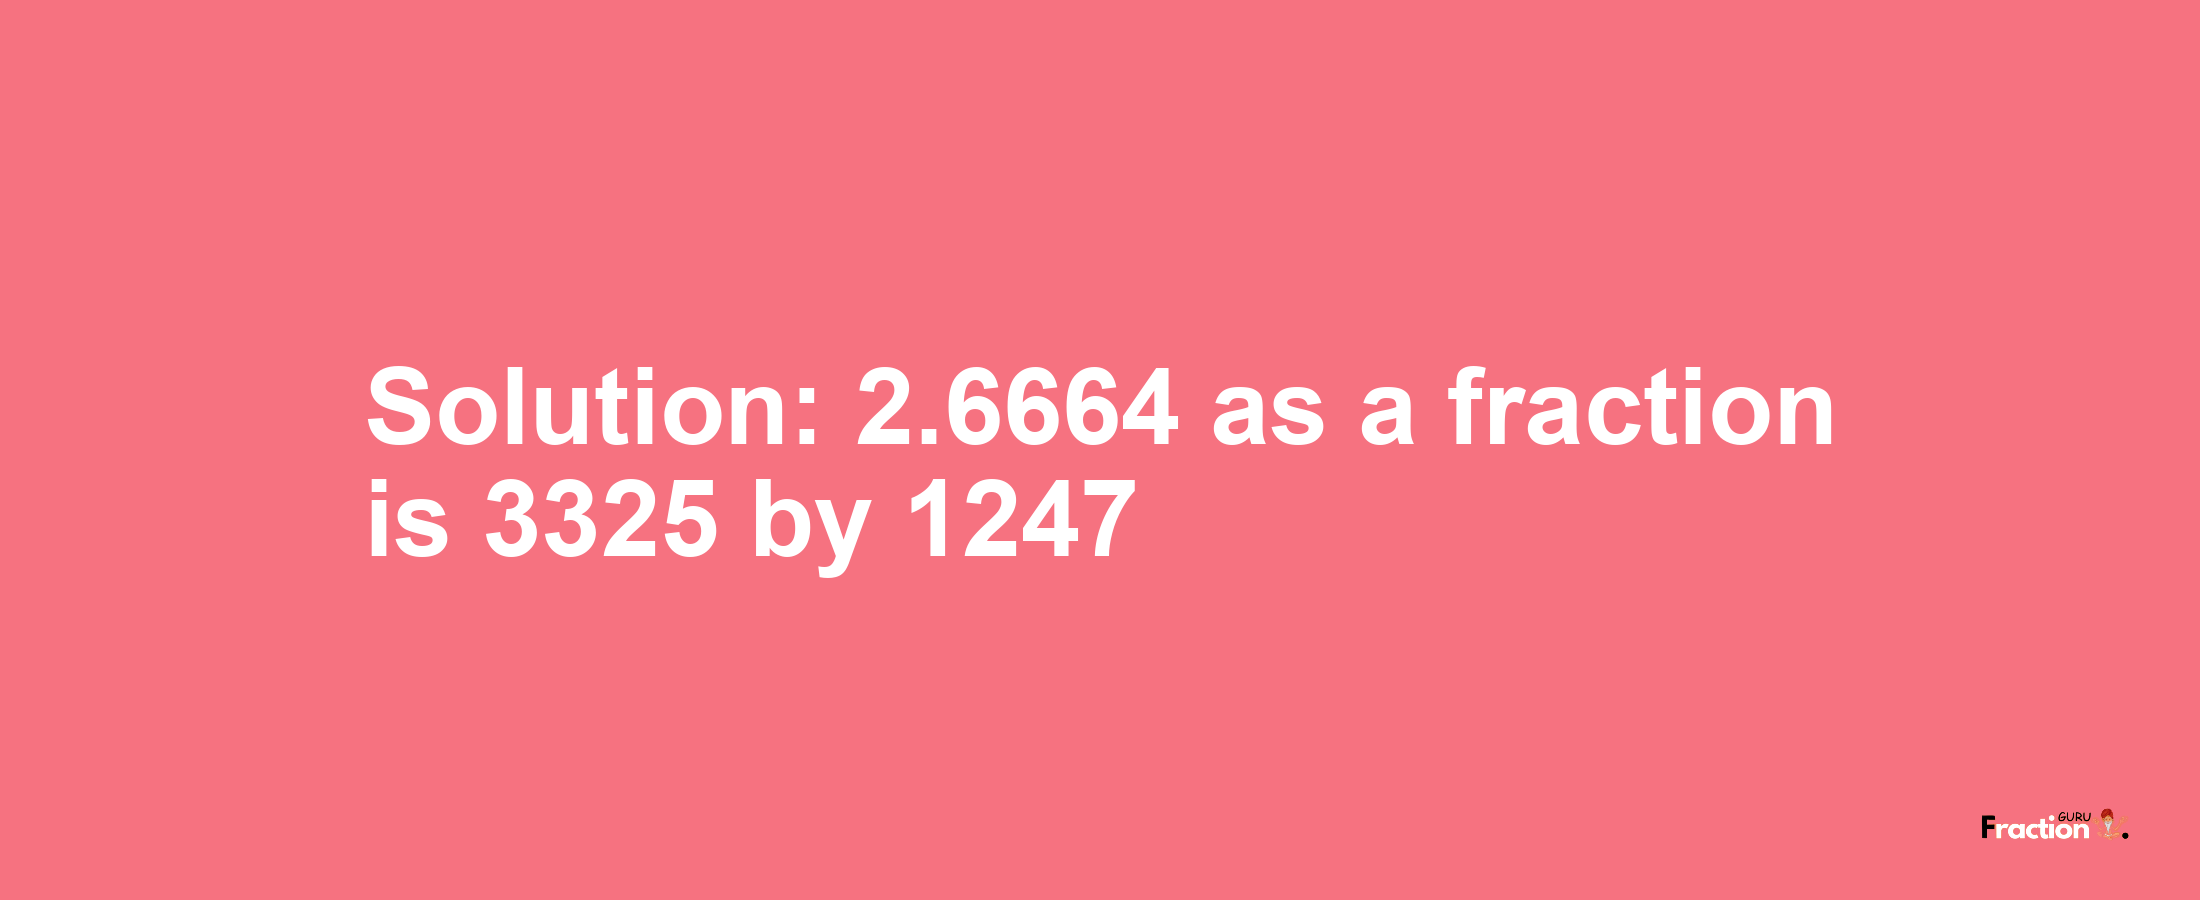 Solution:2.6664 as a fraction is 3325/1247